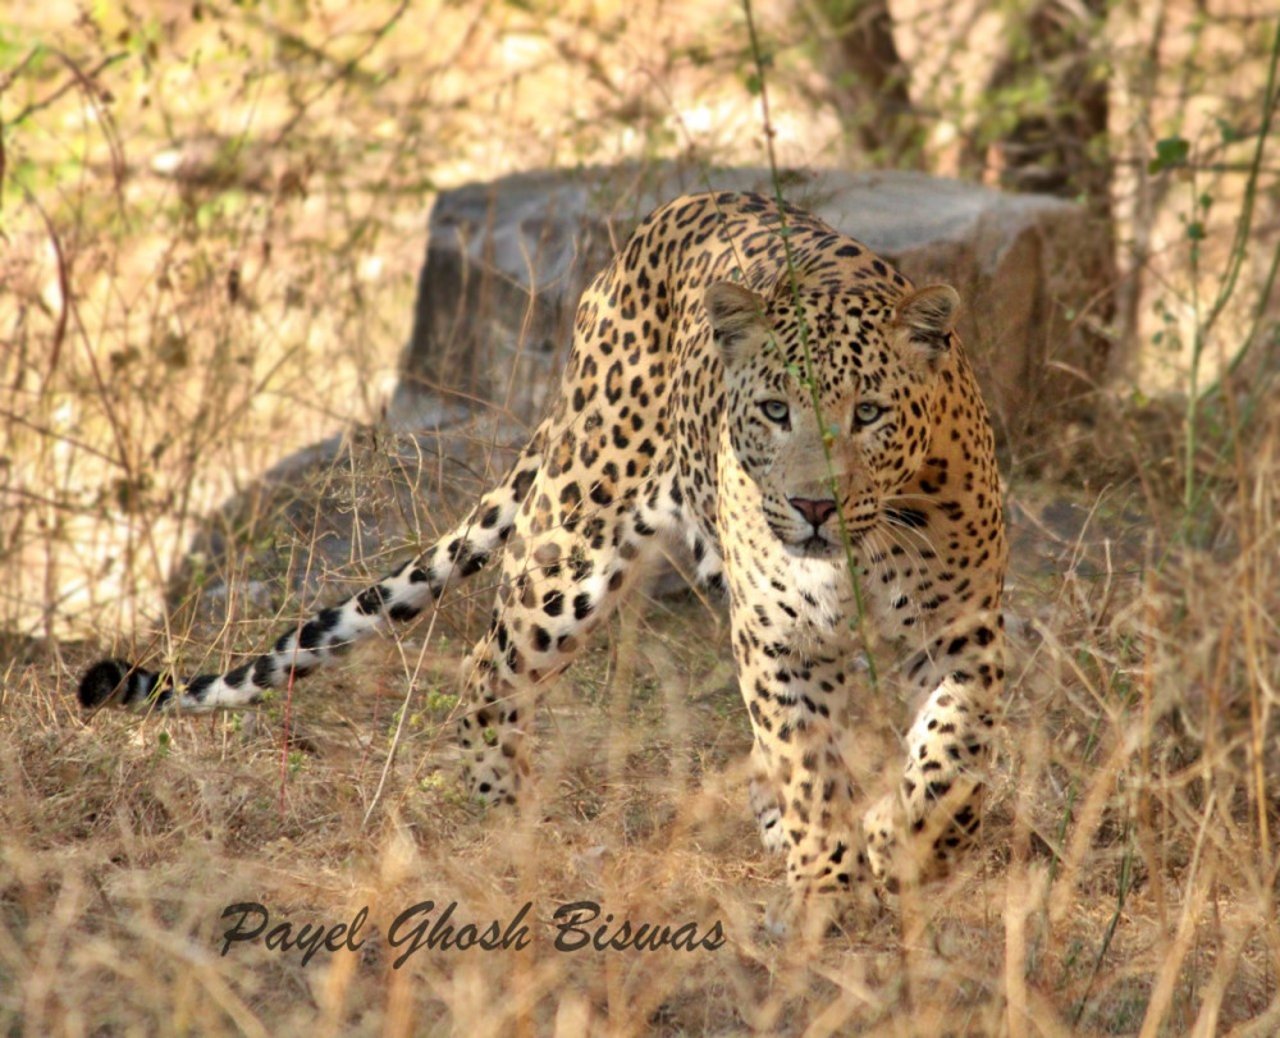 Wildlife is best enjoyed in the wild. Leopard in Jhalana Leopard Reserve, Jaipur Rajasthan. Photograph by Payel Biswas